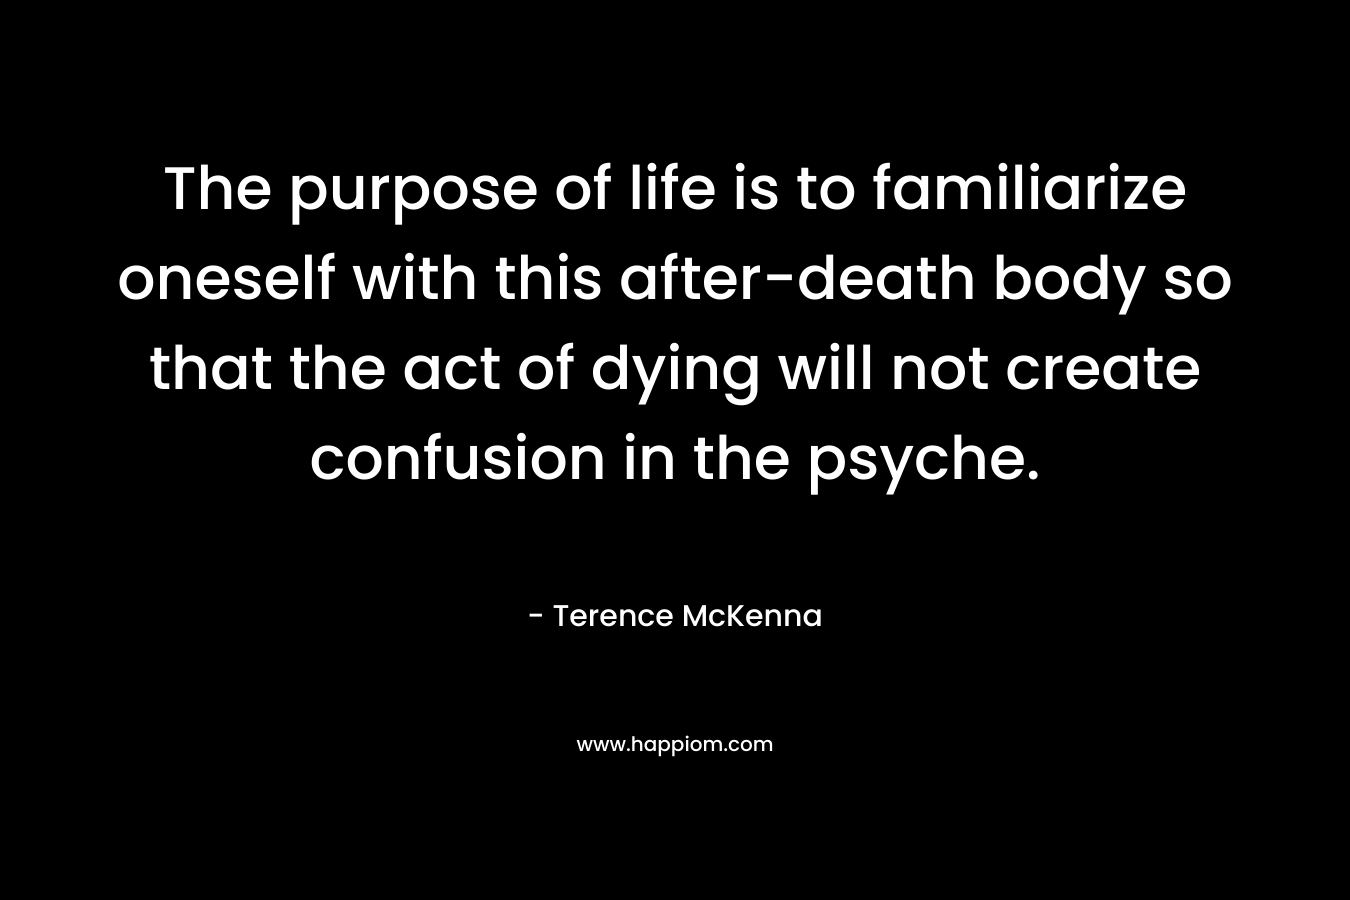 The purpose of life is to familiarize oneself with this after-death body so that the act of dying will not create confusion in the psyche. – Terence McKenna